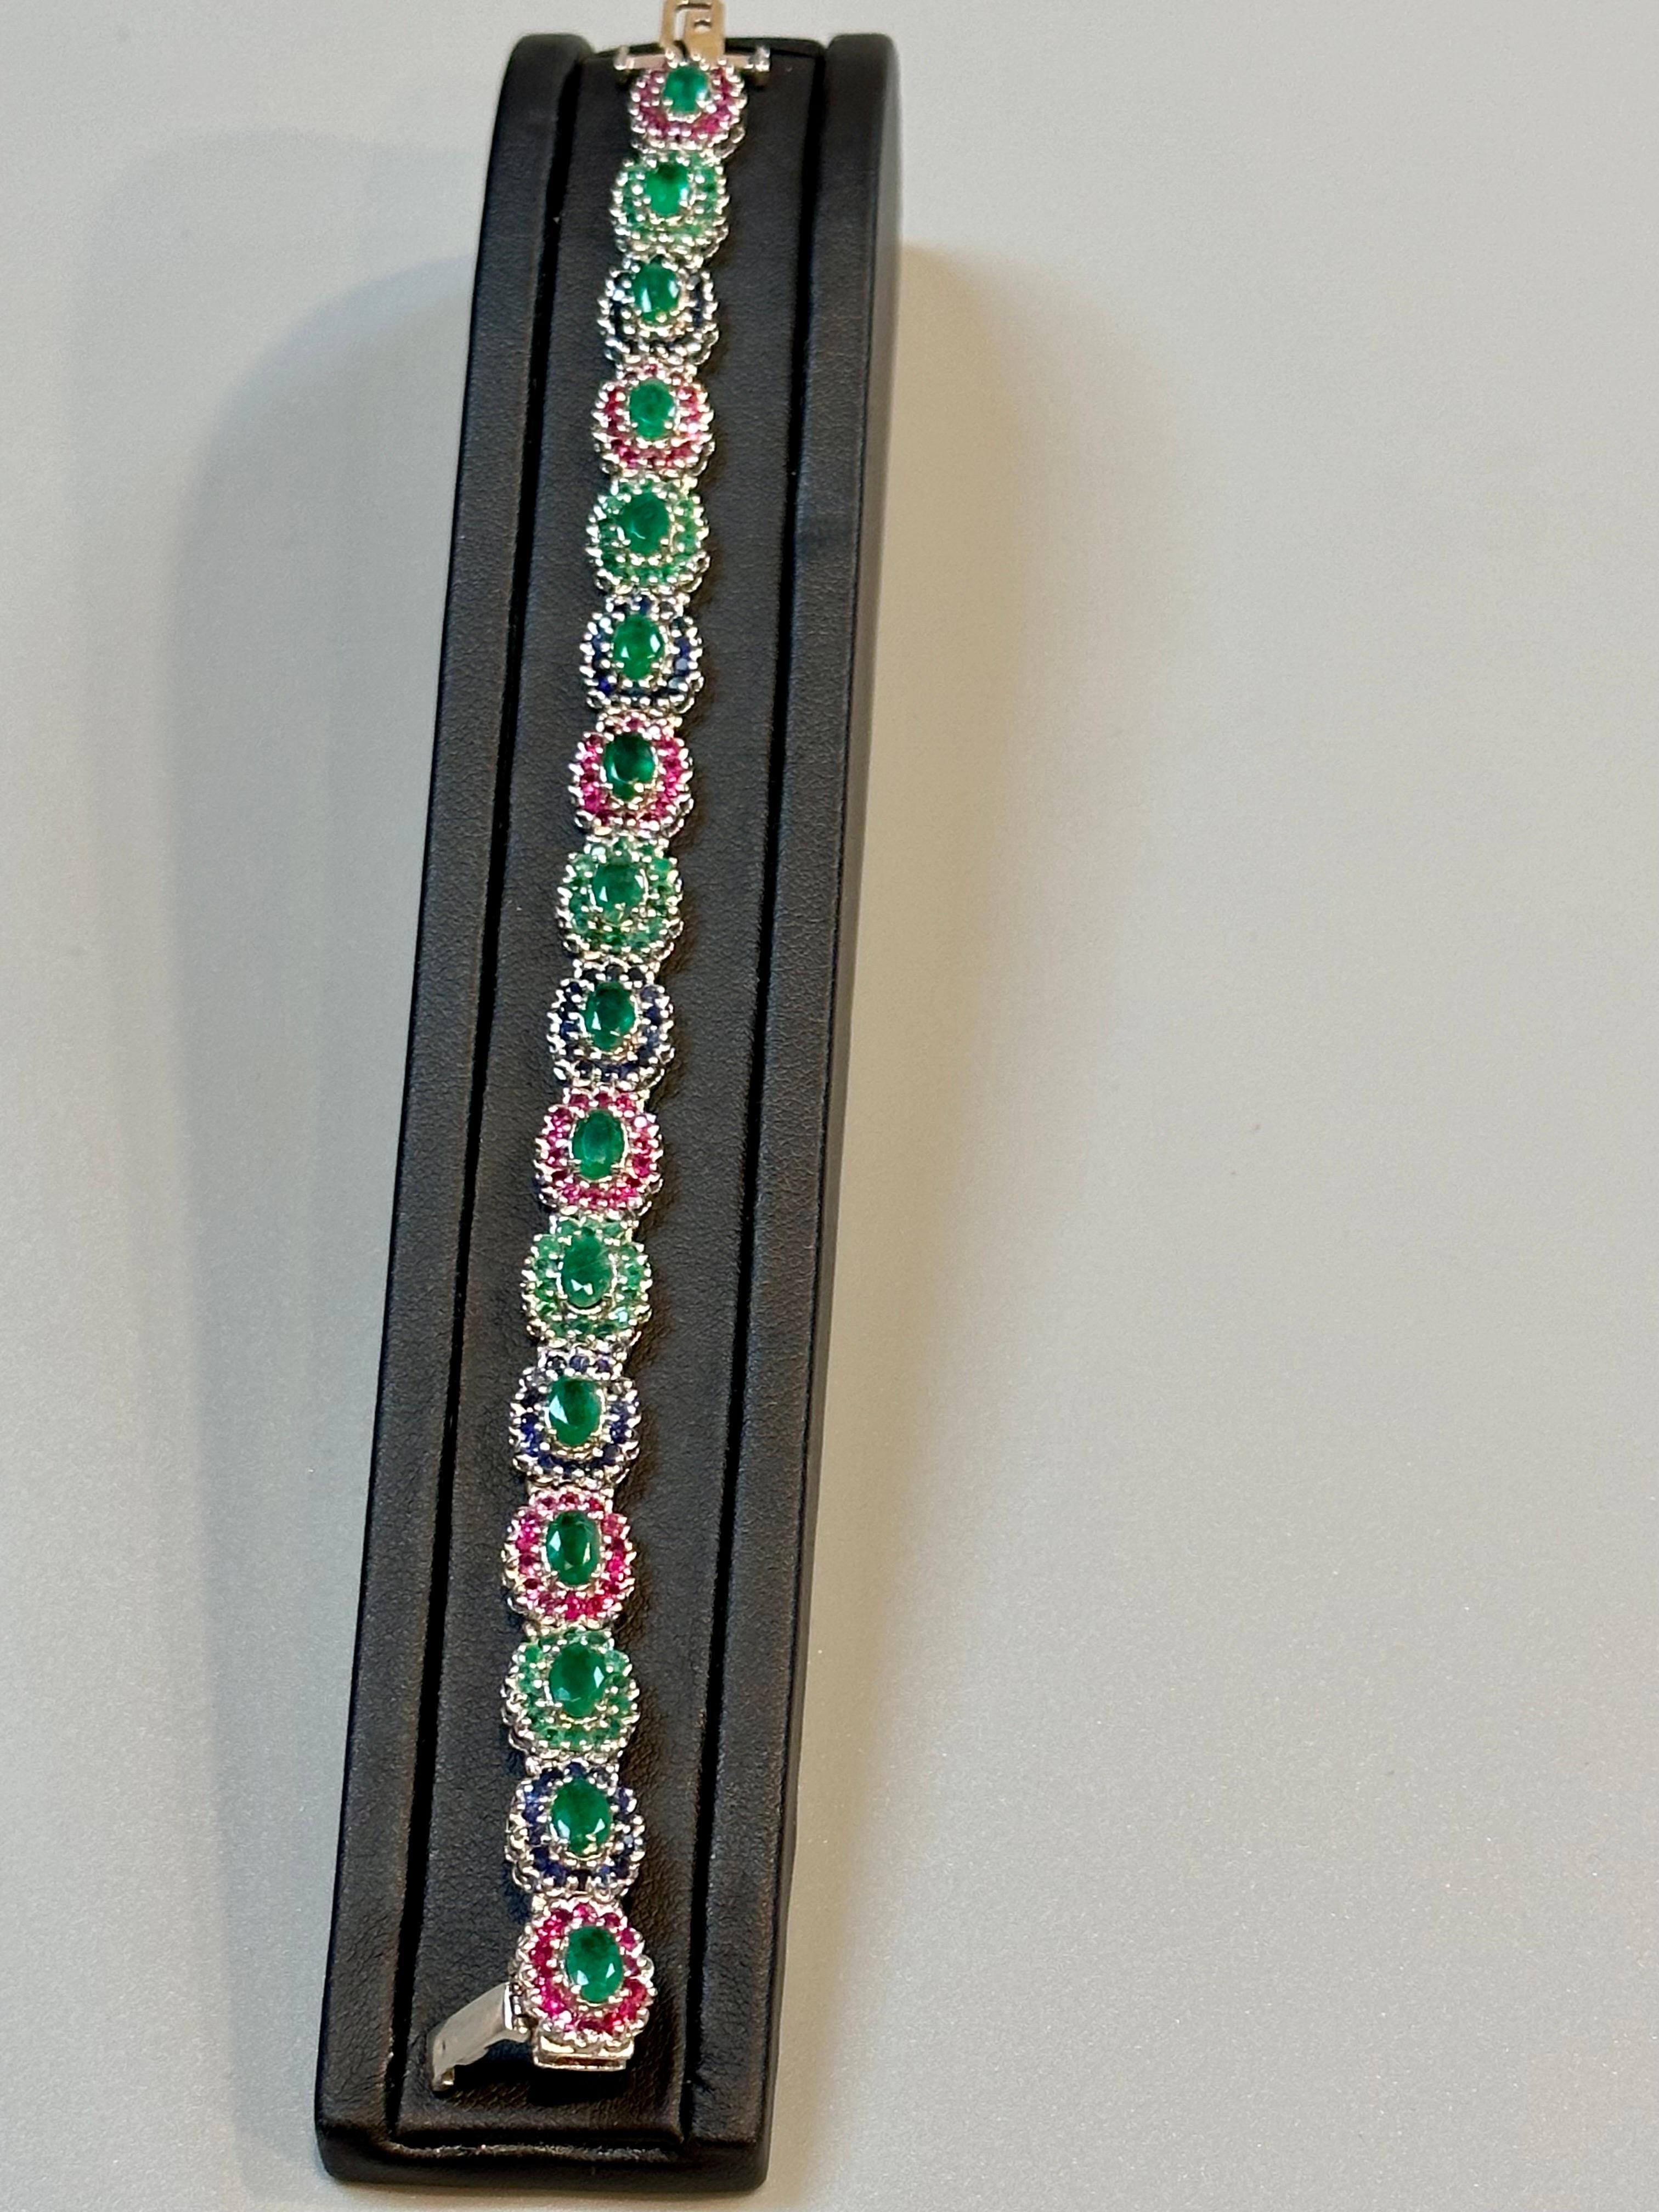 8 Ct Oval Cut Emerald & Ruby & Sapphire Tennis Bracelet 14 Kt White Gold 25.5Gm For Sale 2